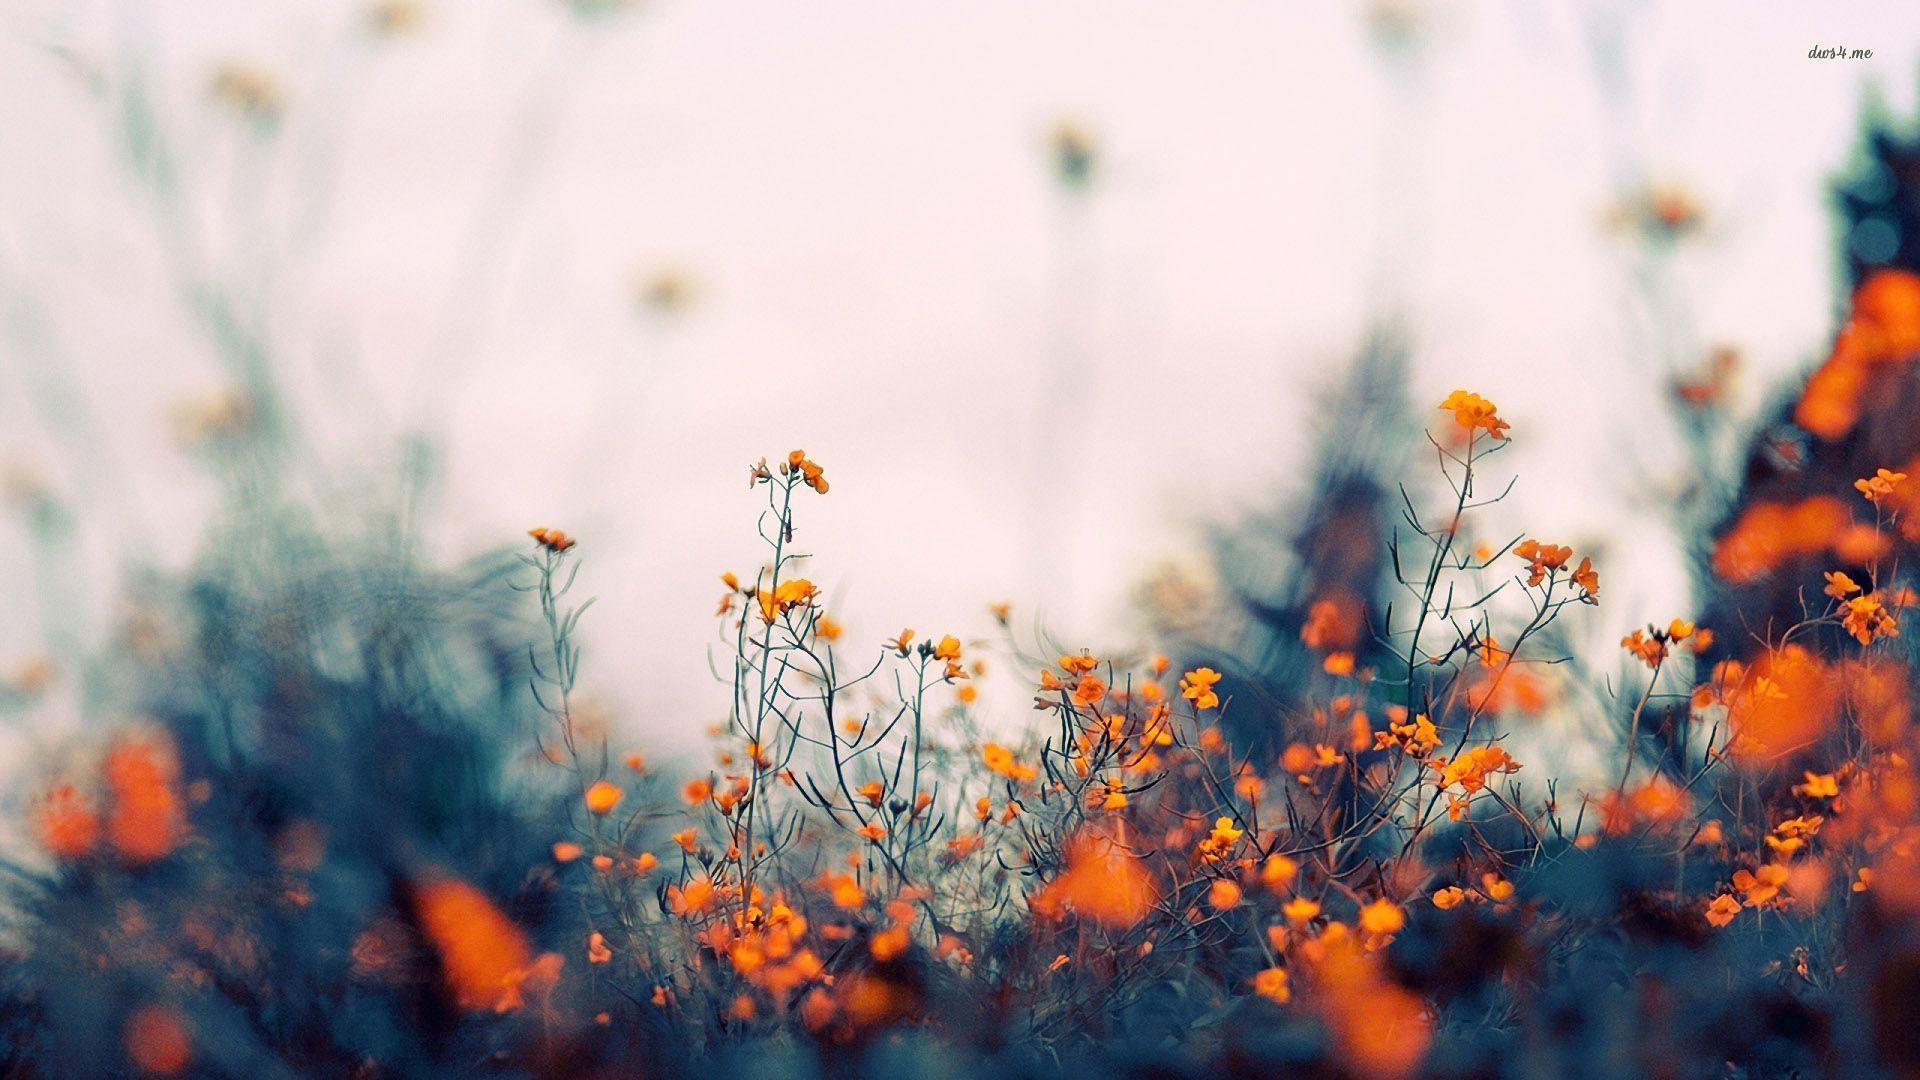 A field of flowers with orange and yellow petals - Pastel orange